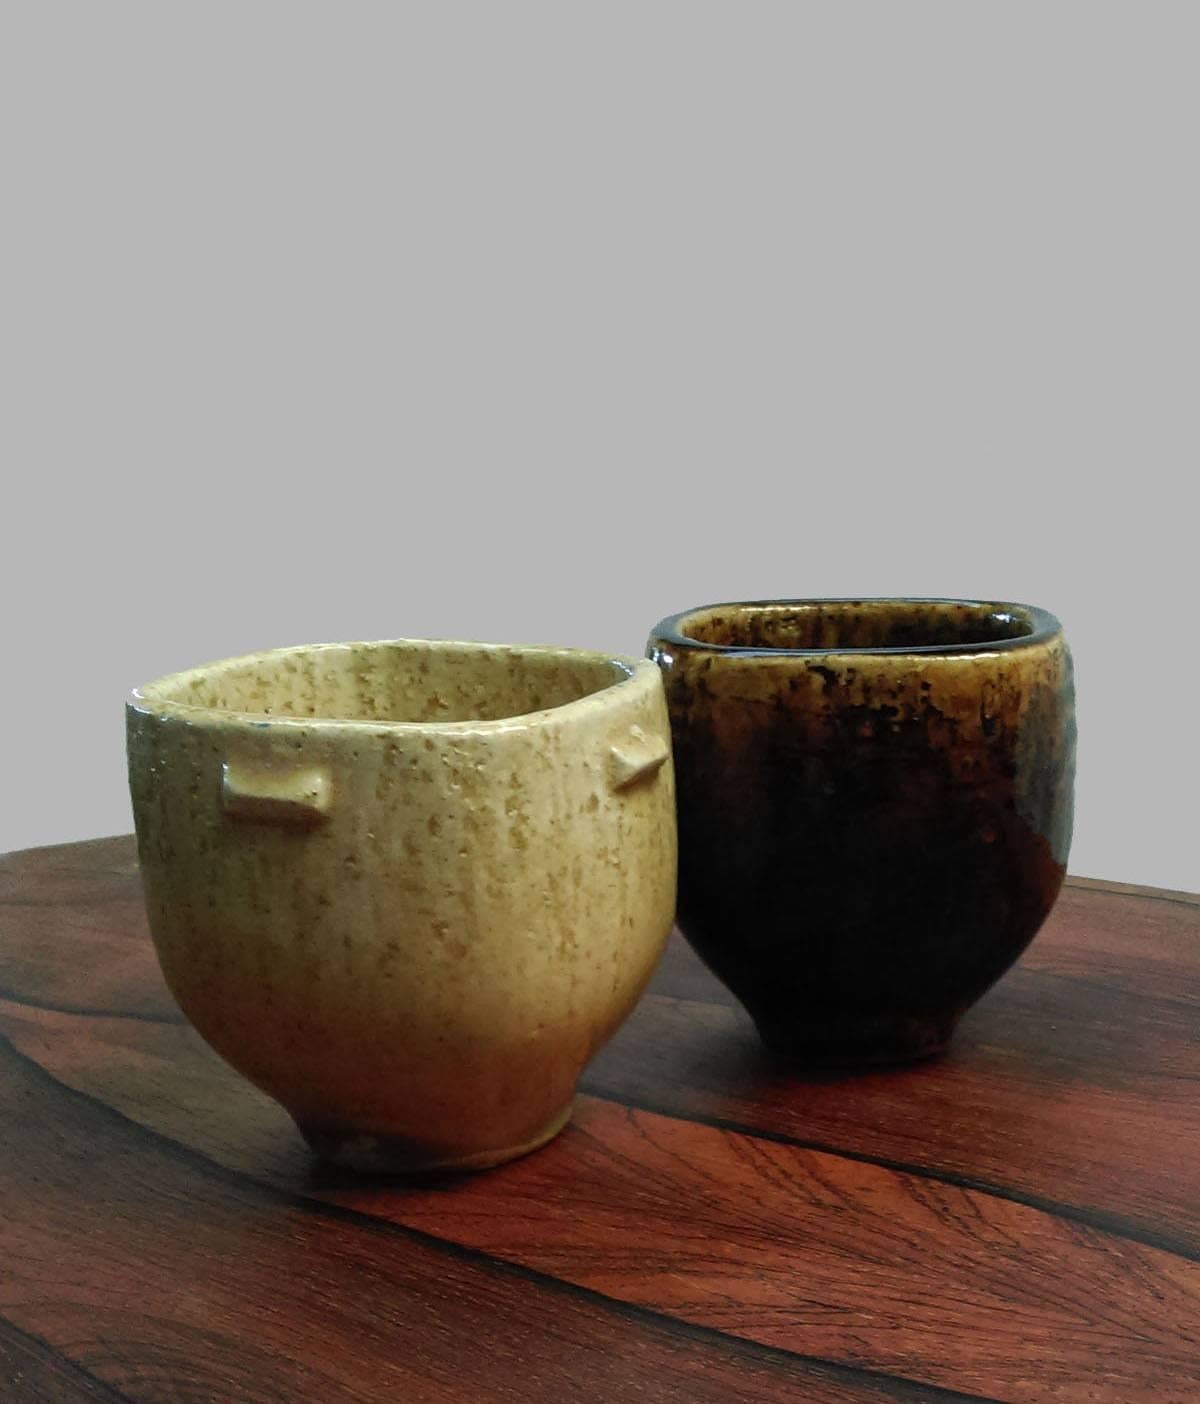 Pair of stoneware bowles, Palshus by Per Linnemann-Schmidt, a well renowned Danish ceramist.
The two bowls are a fine example of contemporary Danish ceramics from the 1970s and are stamped: Palshus, Denmark, PLS for Per Linnemann-Schmidt.